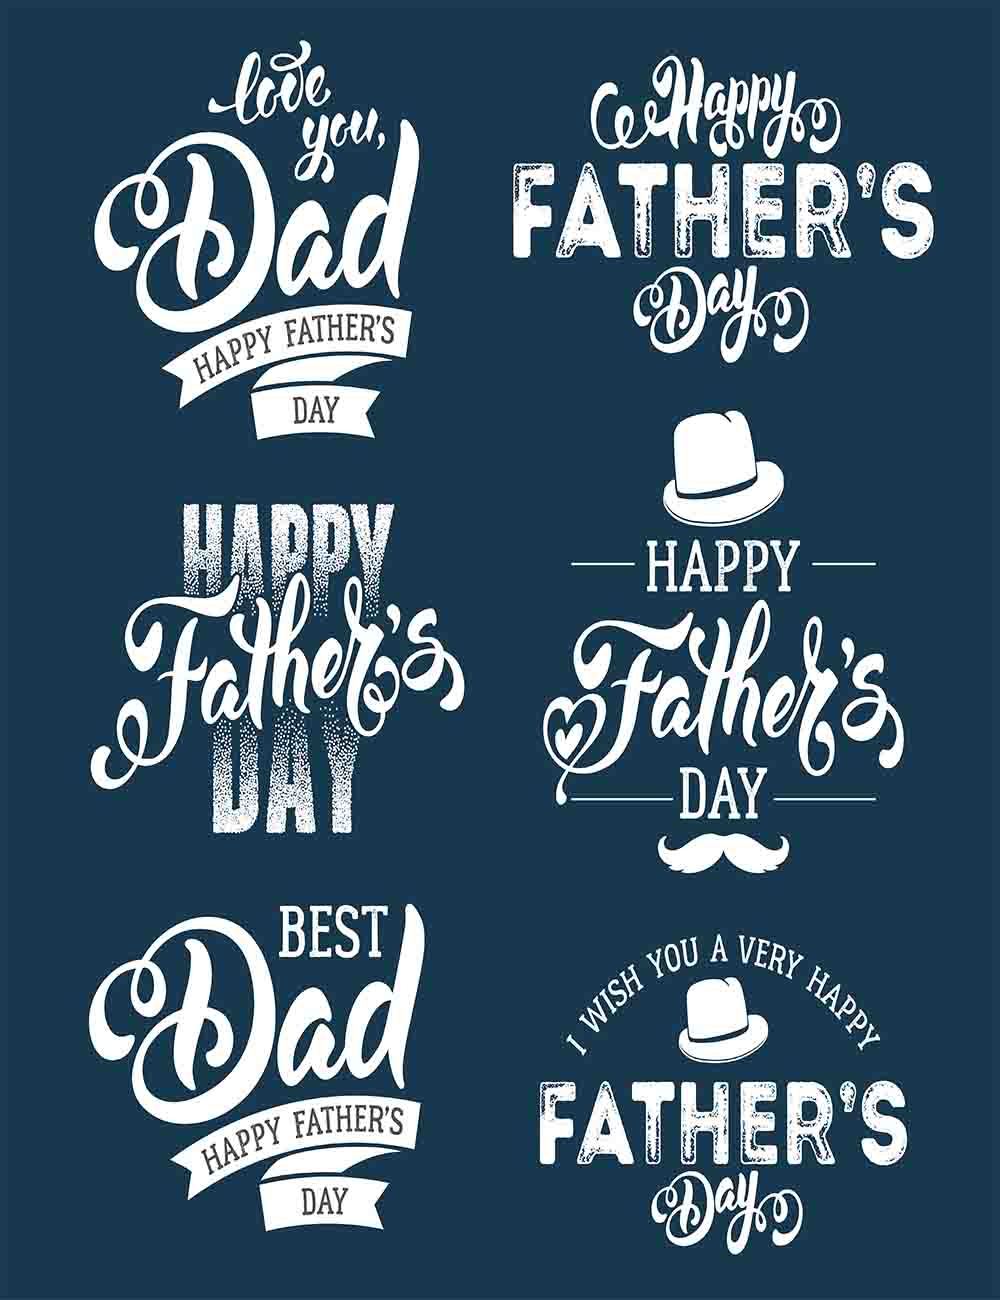 Painted Variety Front Happy Father's Day Photography Backdrop Shopbackdrop